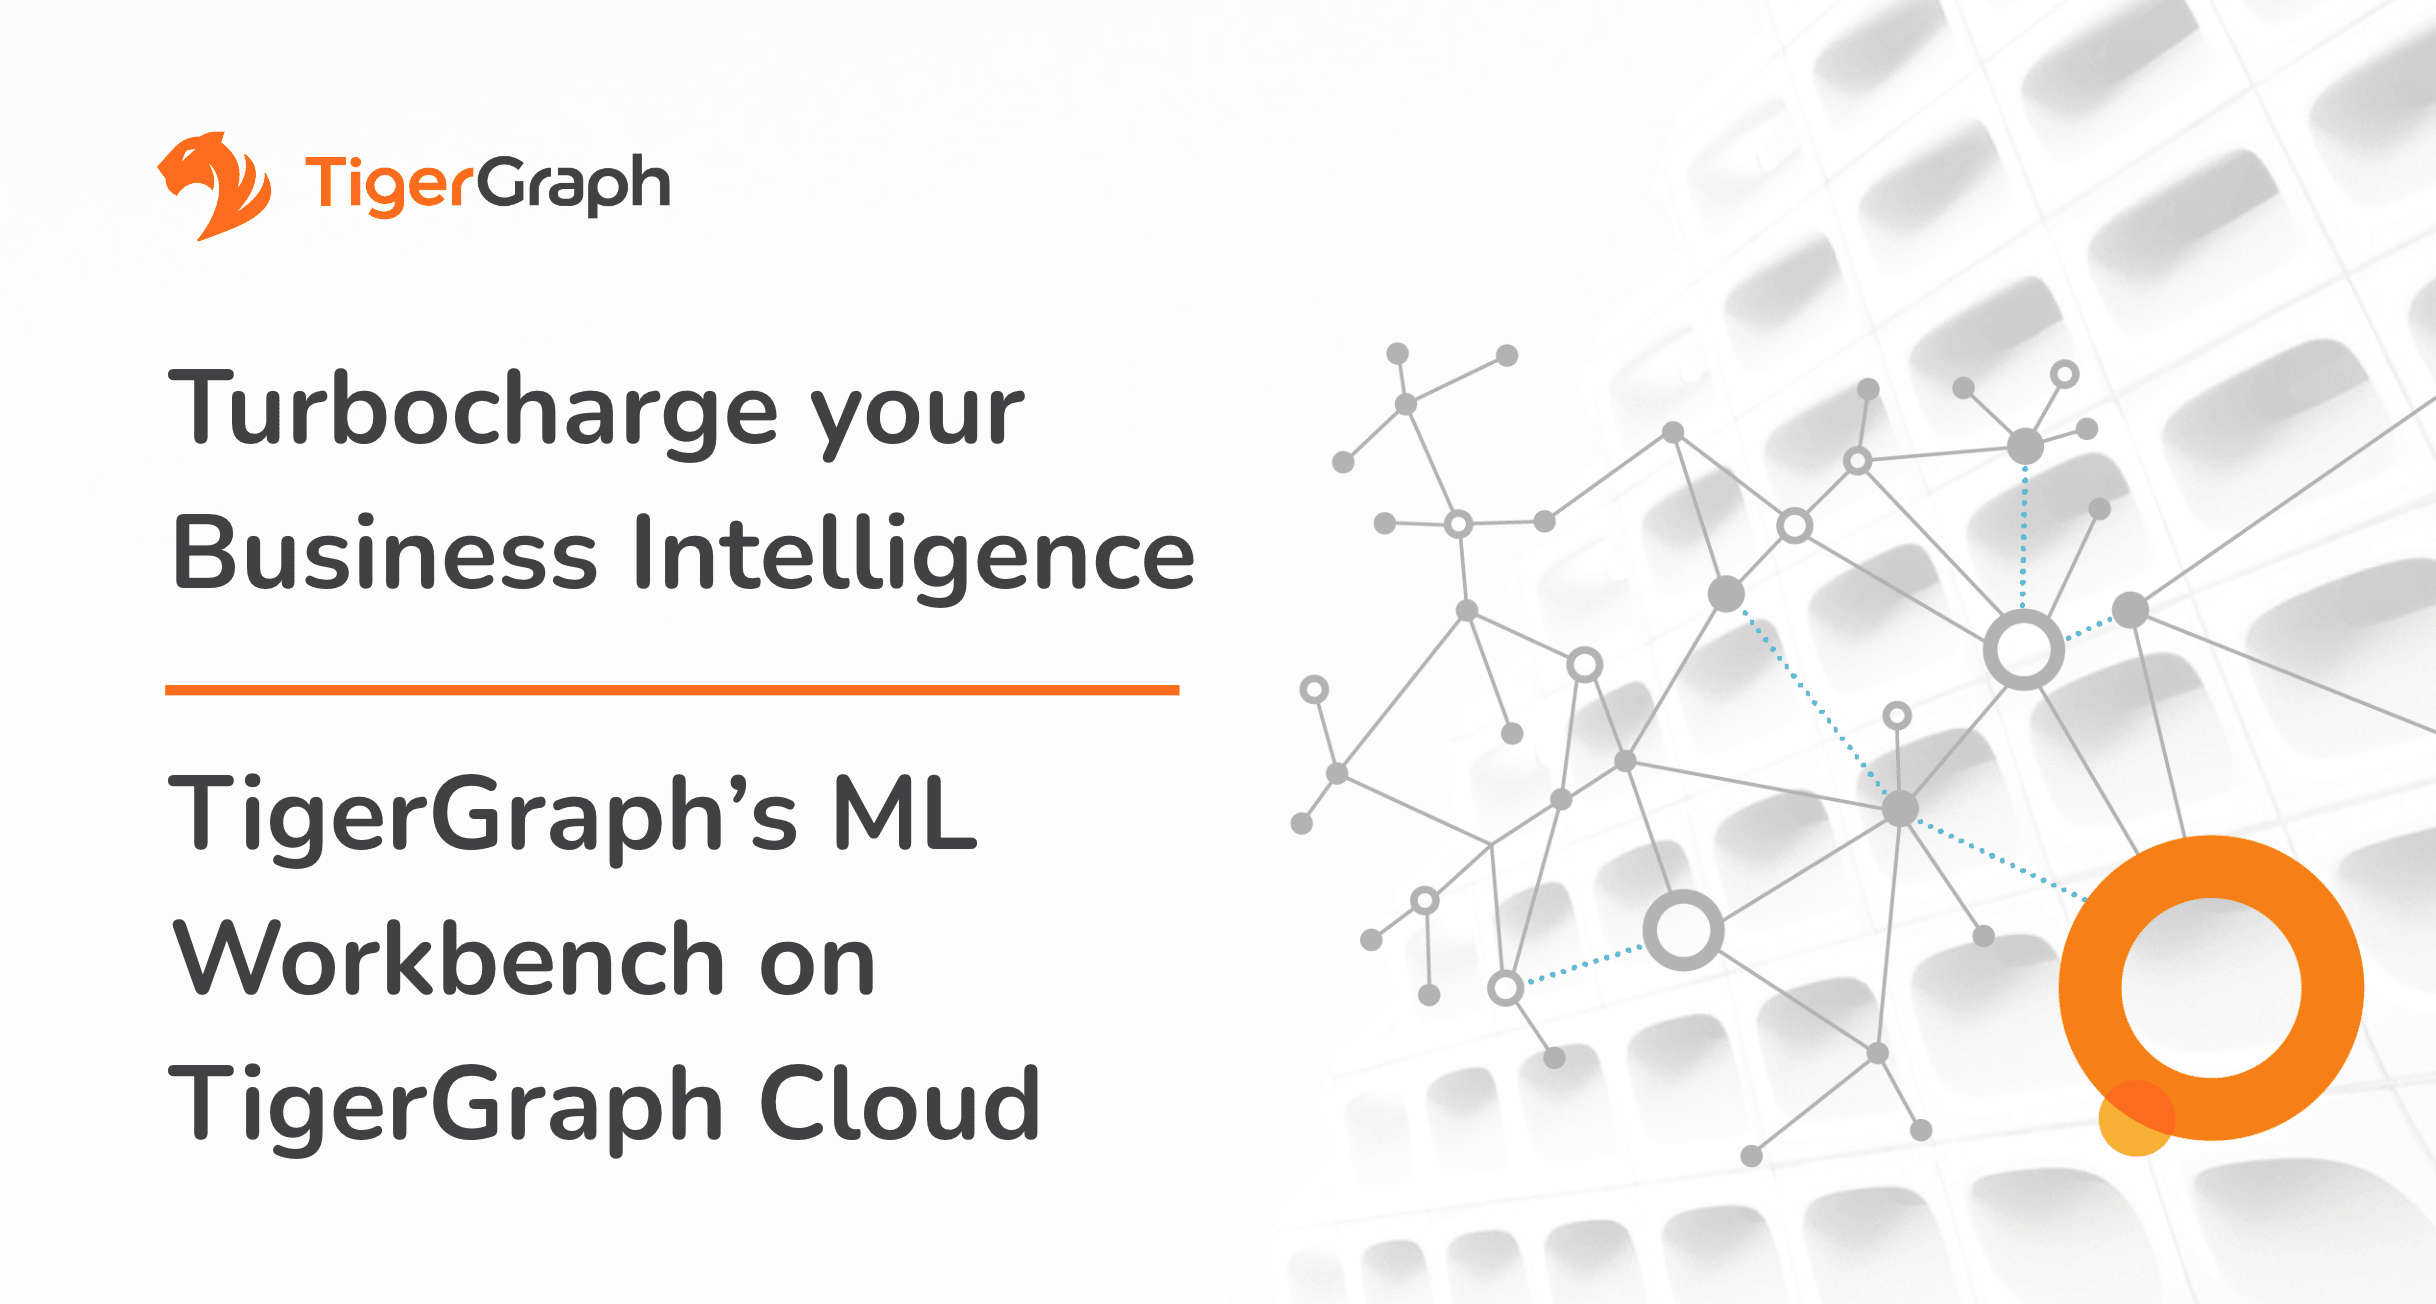 Turbocharge your business intelligence with TigerGraph’s ML Workbench on TigerGraph Cloud